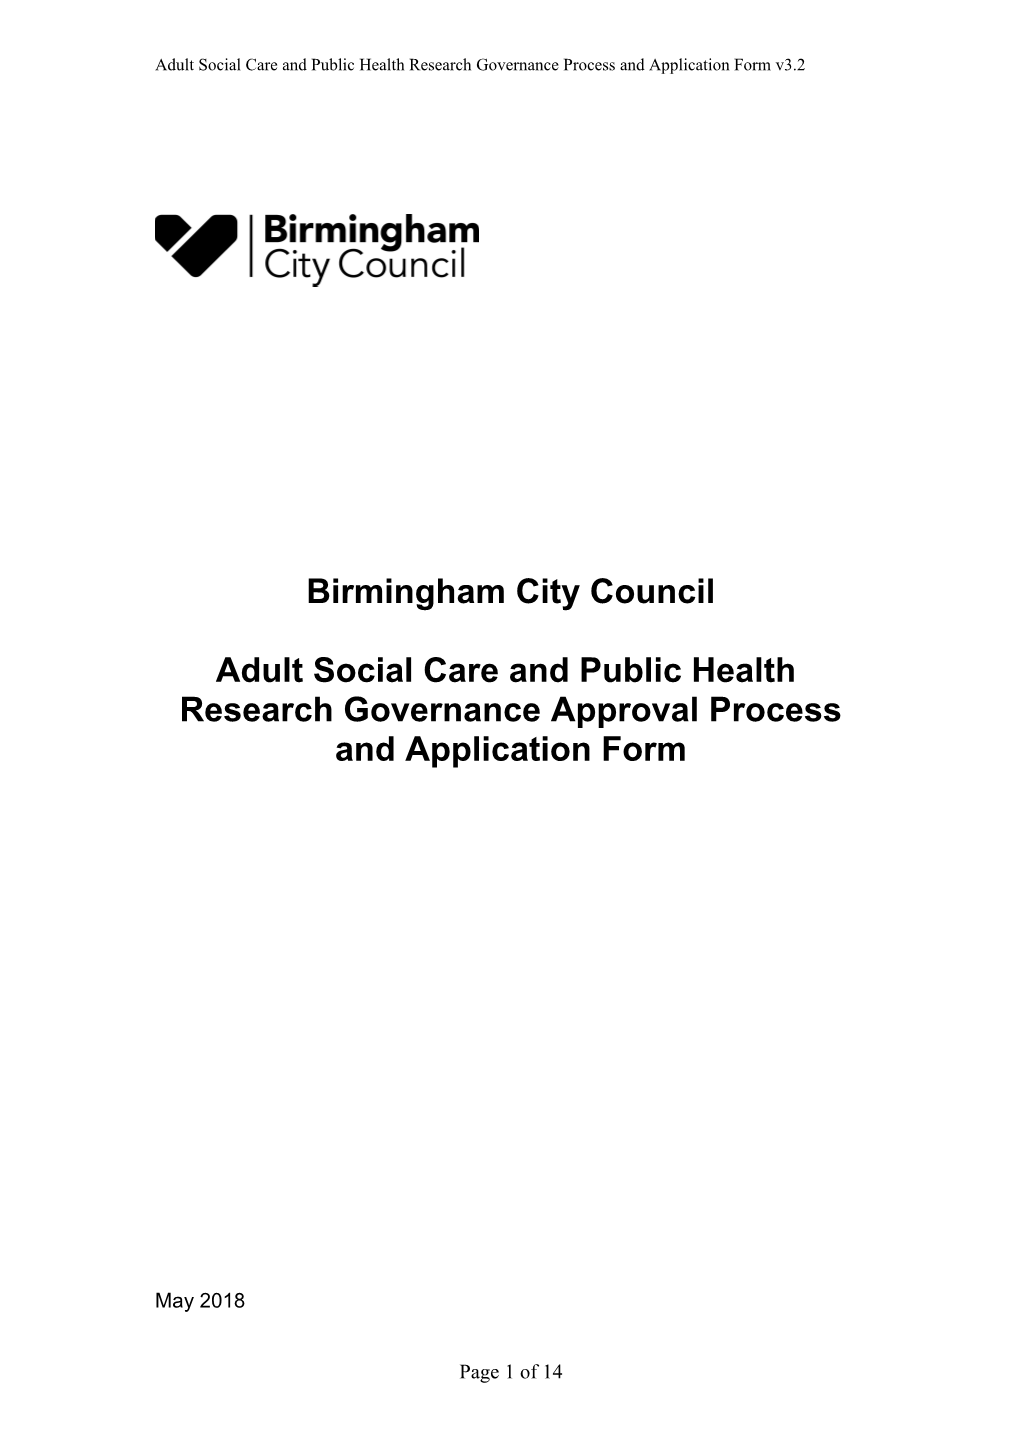 Adult Social Care and Public Health Research Governance Process and Application Formv3.2